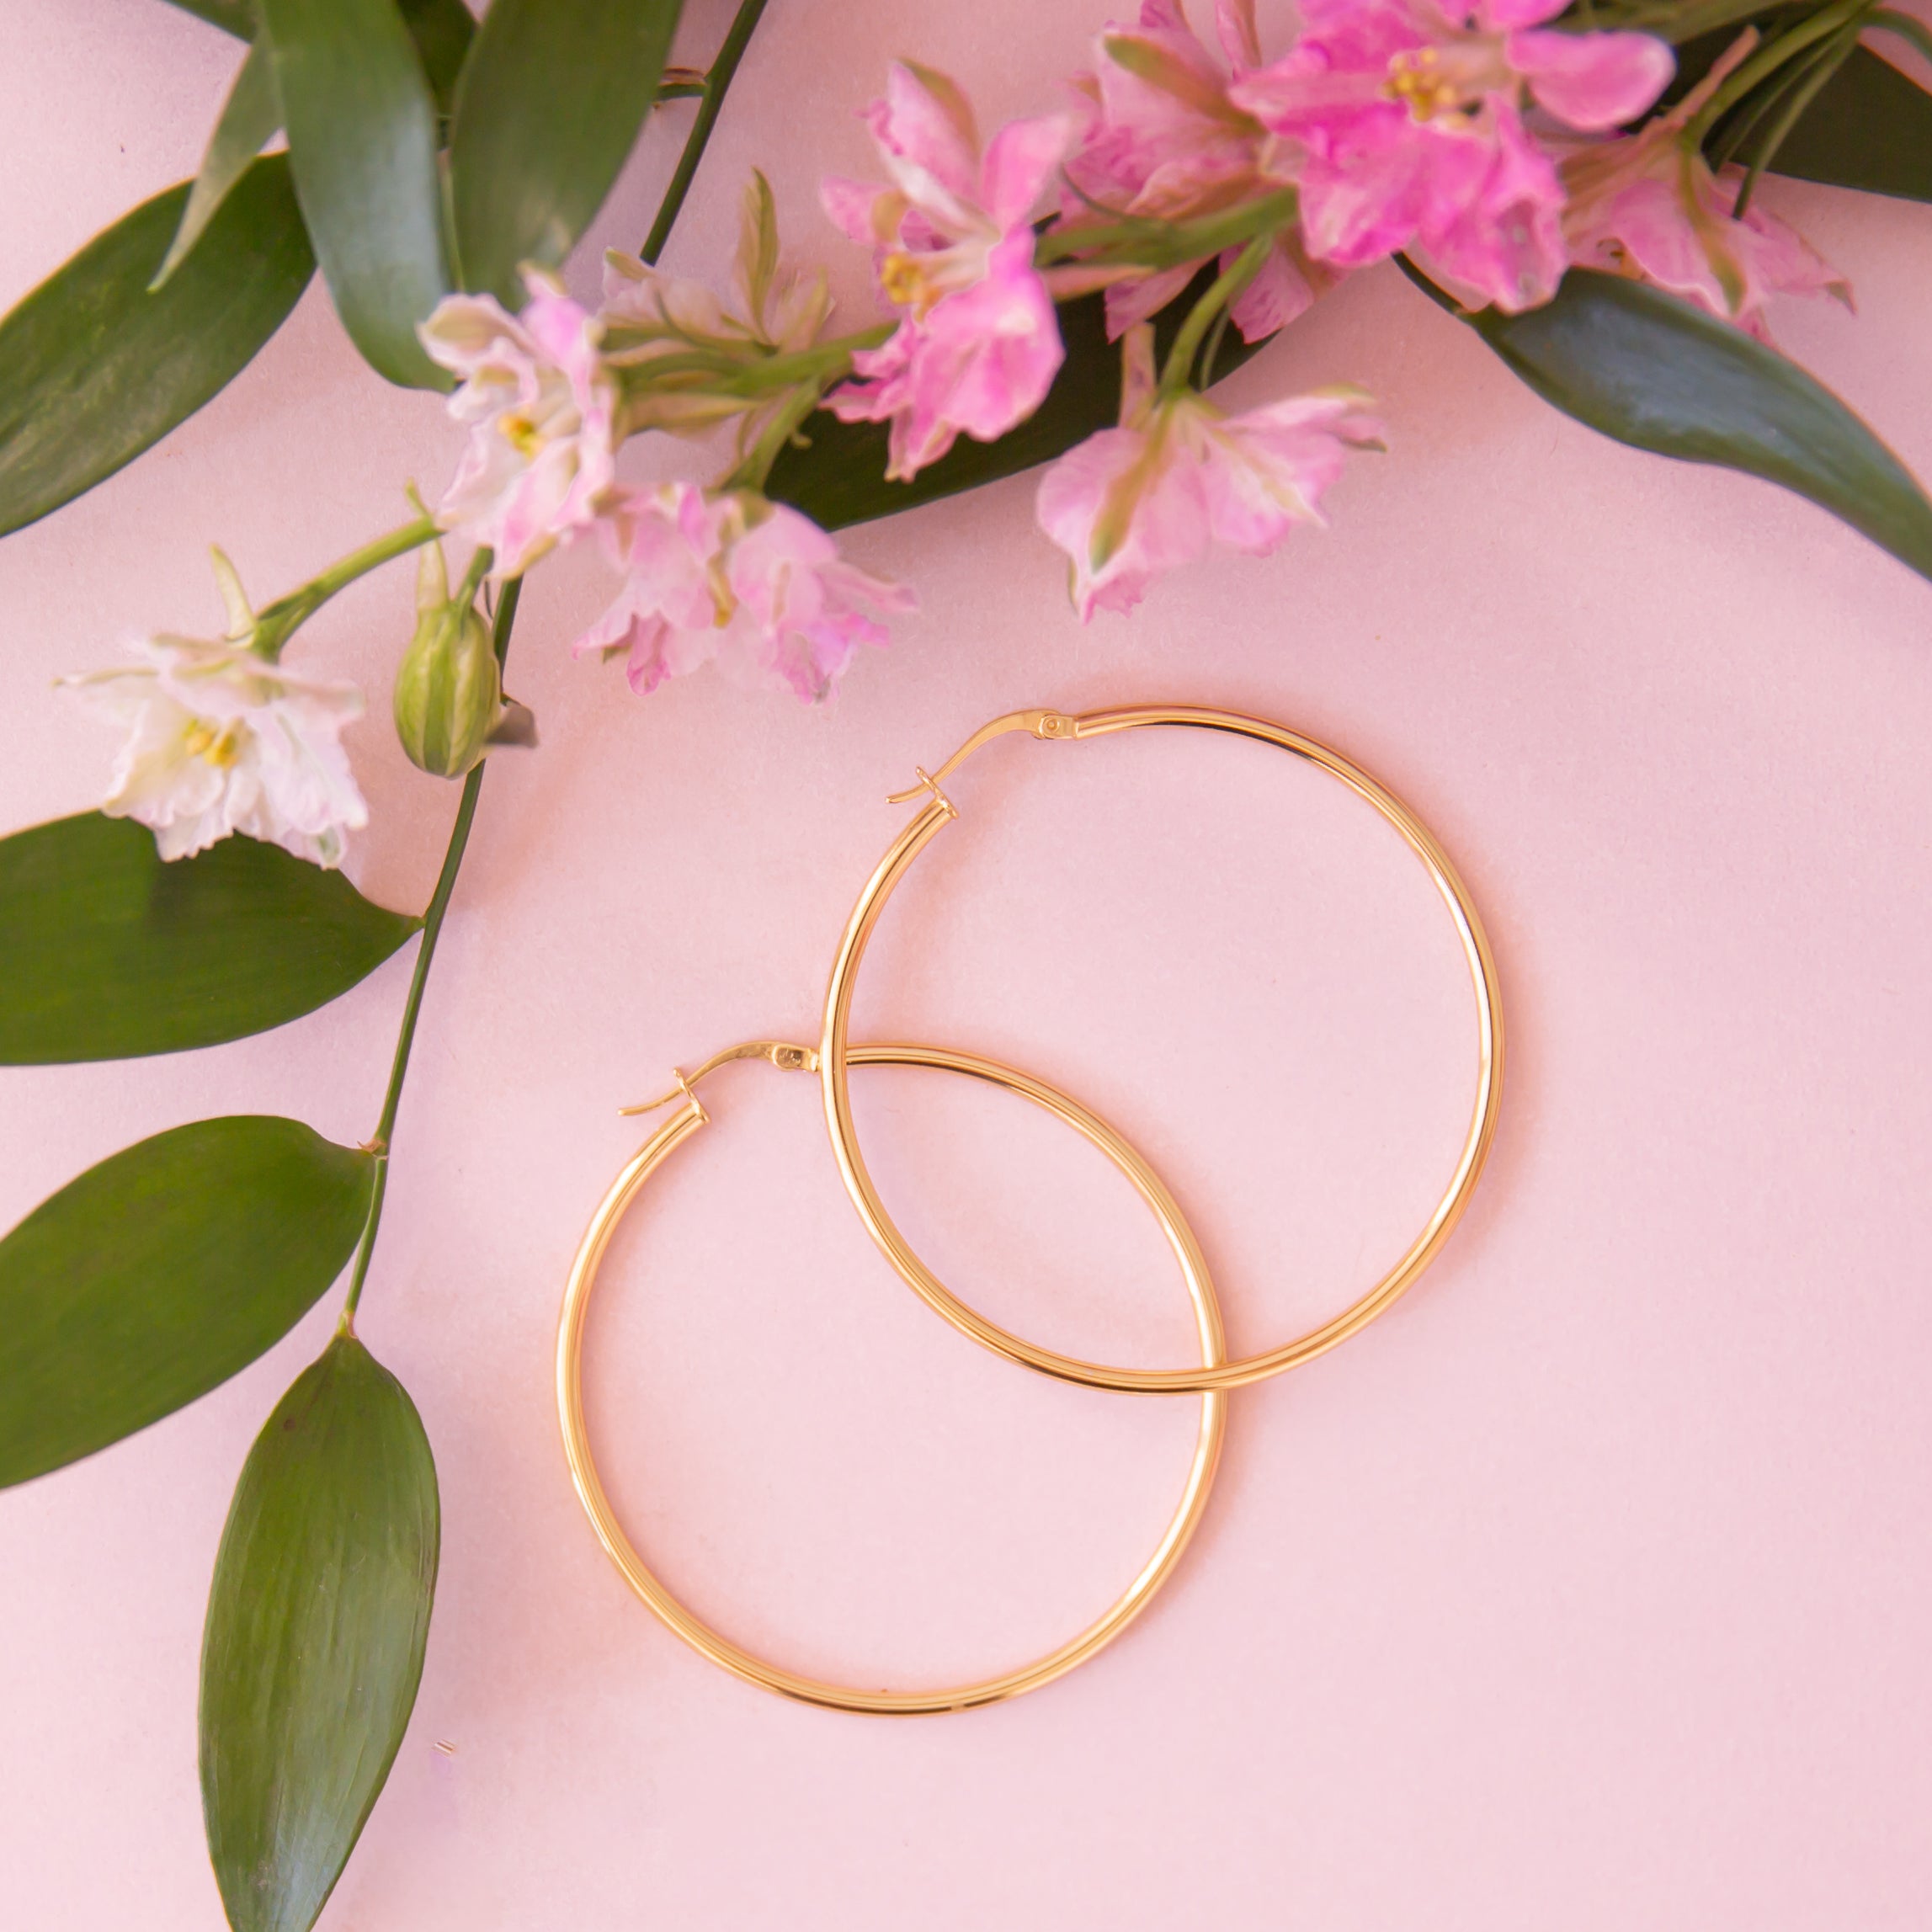 On a pink background is a pair of thin gold hoop earrings next to a stem of pink flowers.